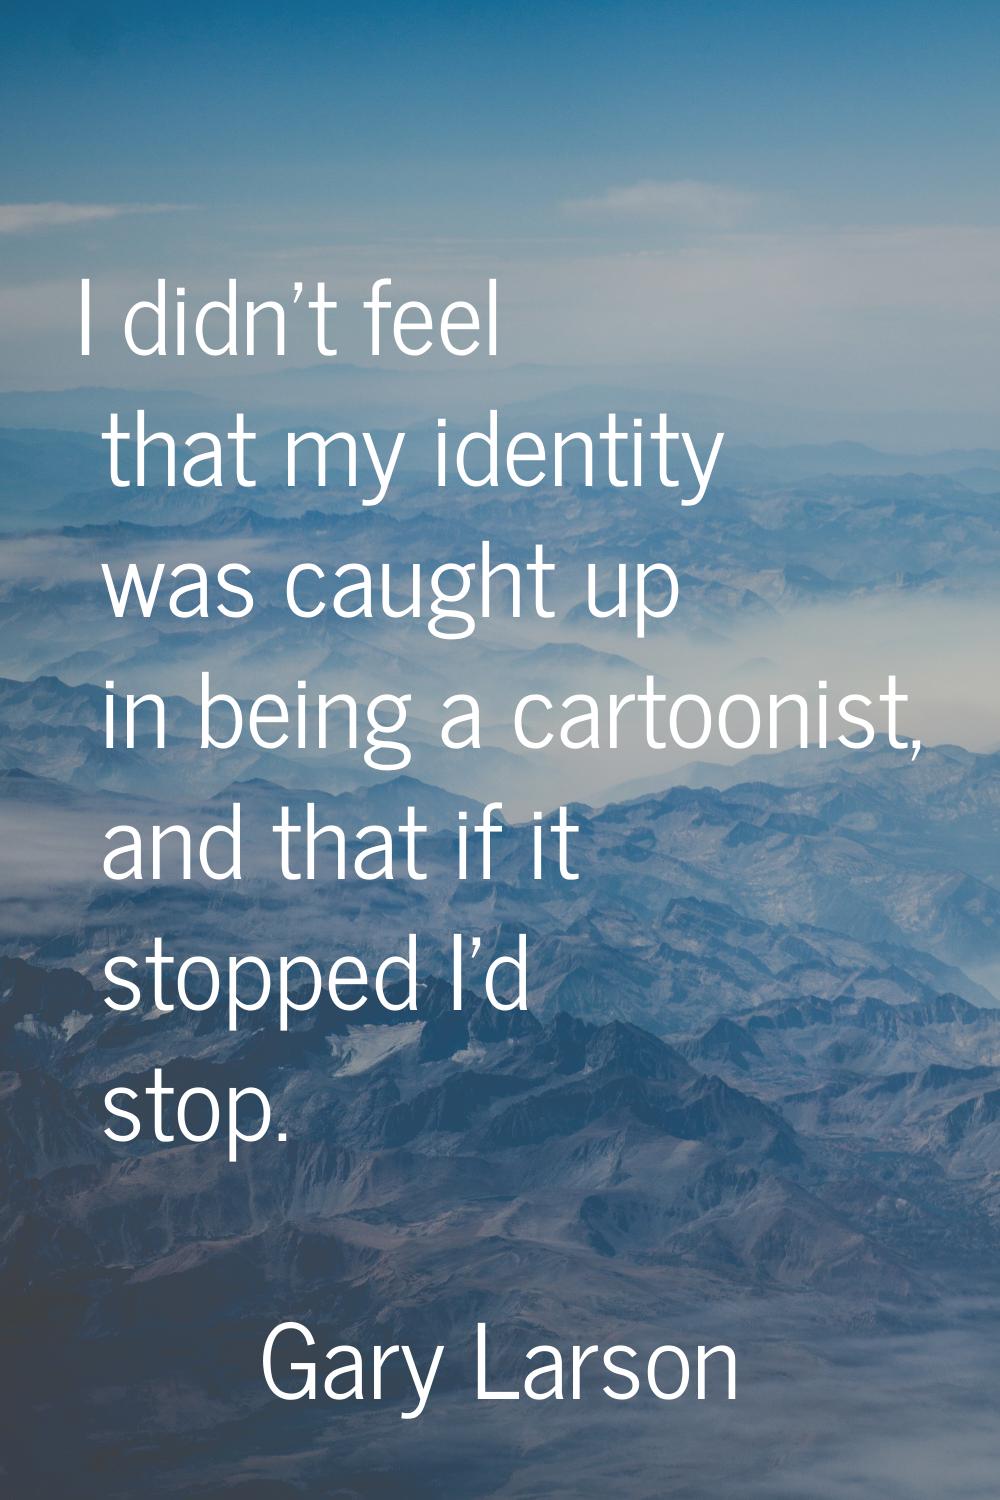 I didn't feel that my identity was caught up in being a cartoonist, and that if it stopped I'd stop